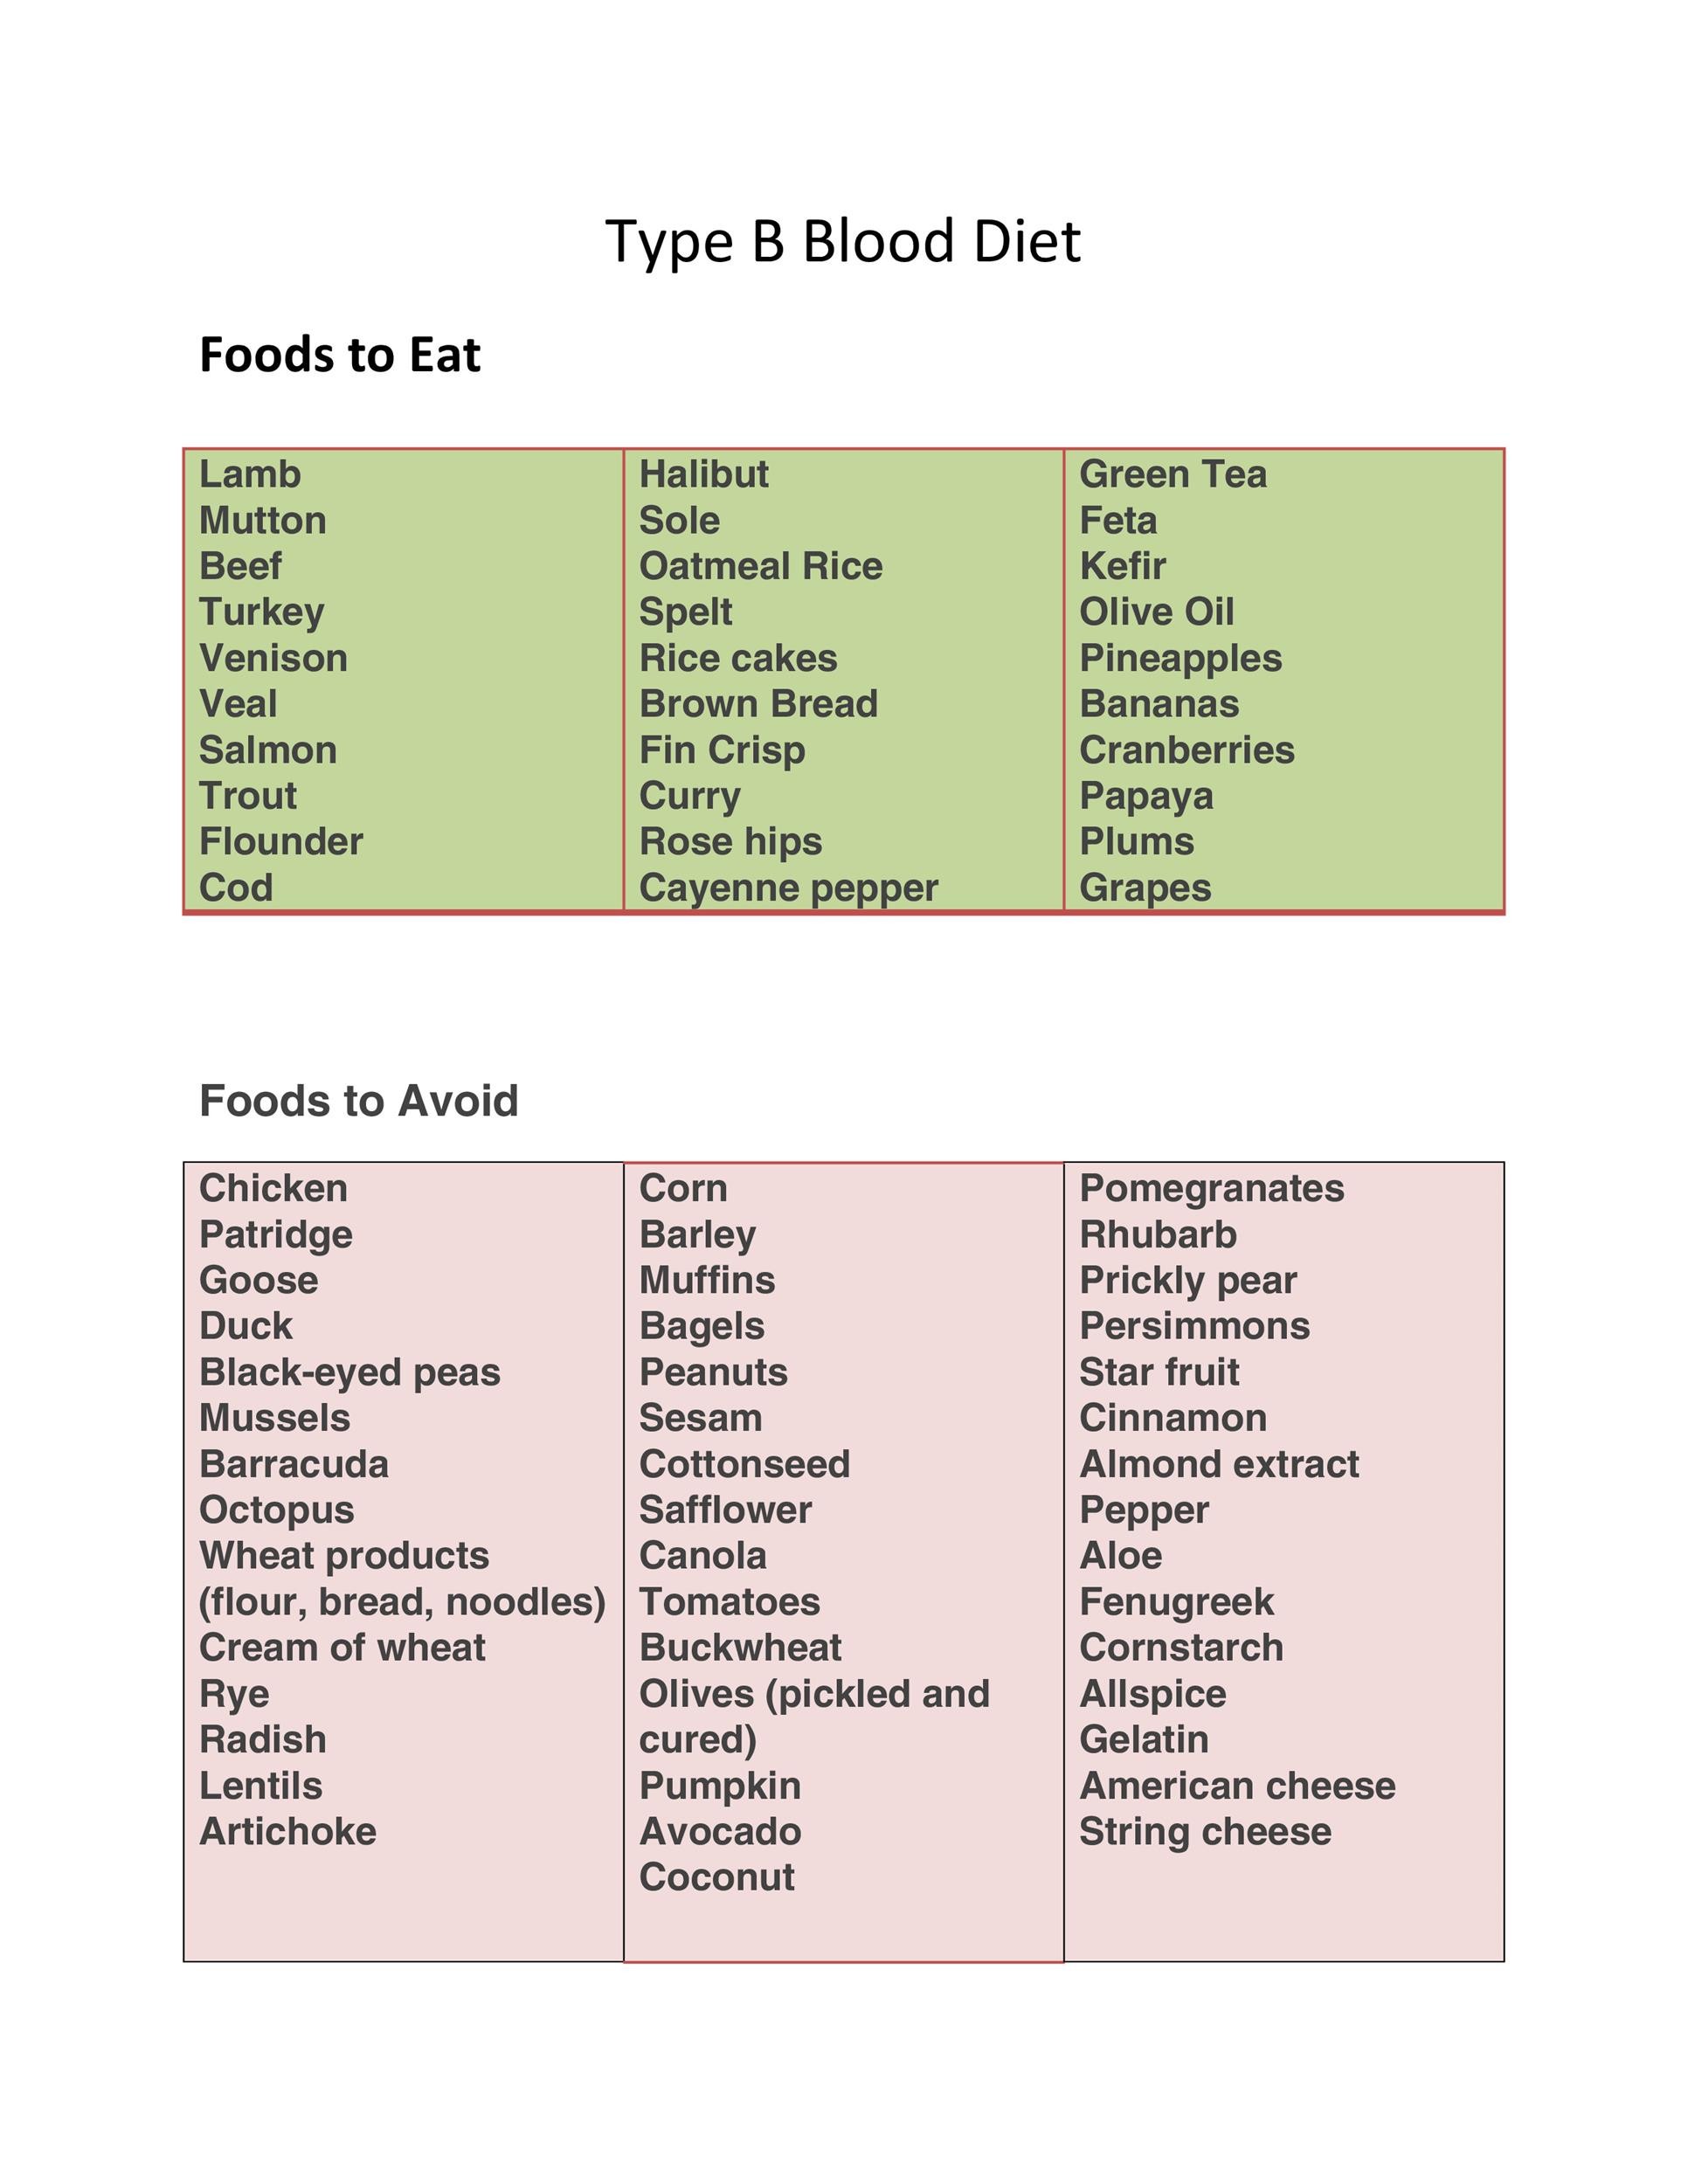 Blood Type O Diet Food Chart